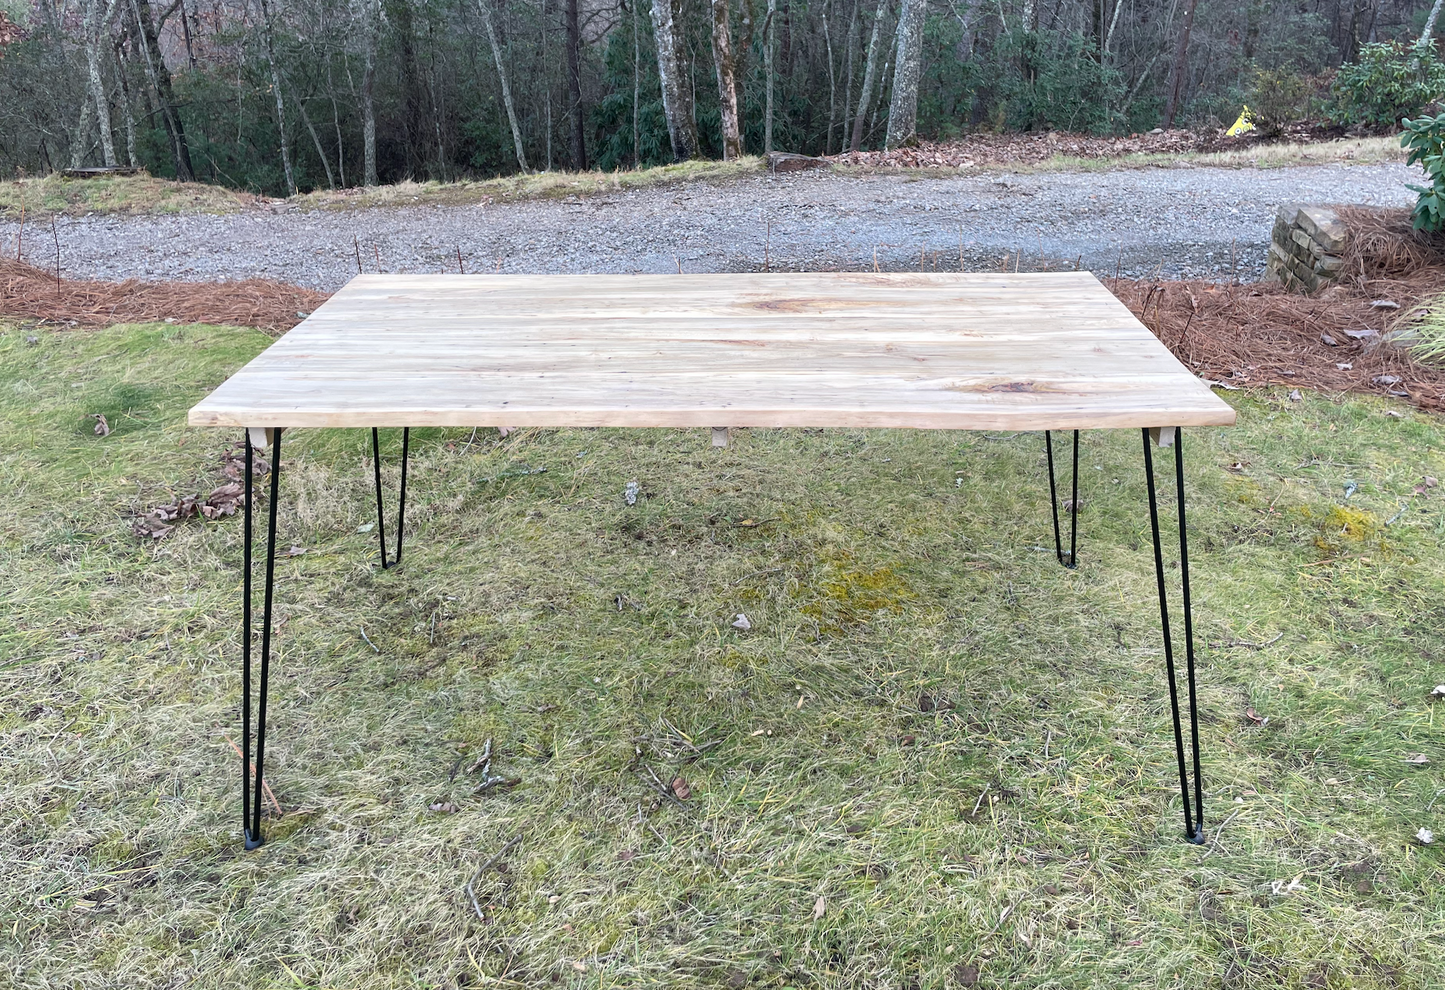 Looking to add modern rustic flair to your eating area? Check out our dining table with a handcrafted maple top and hairpin legs. This table is great for seating 6 or more guests for a meal, games or fellowship, and the wooden top is food-safe and smooth to the touch!